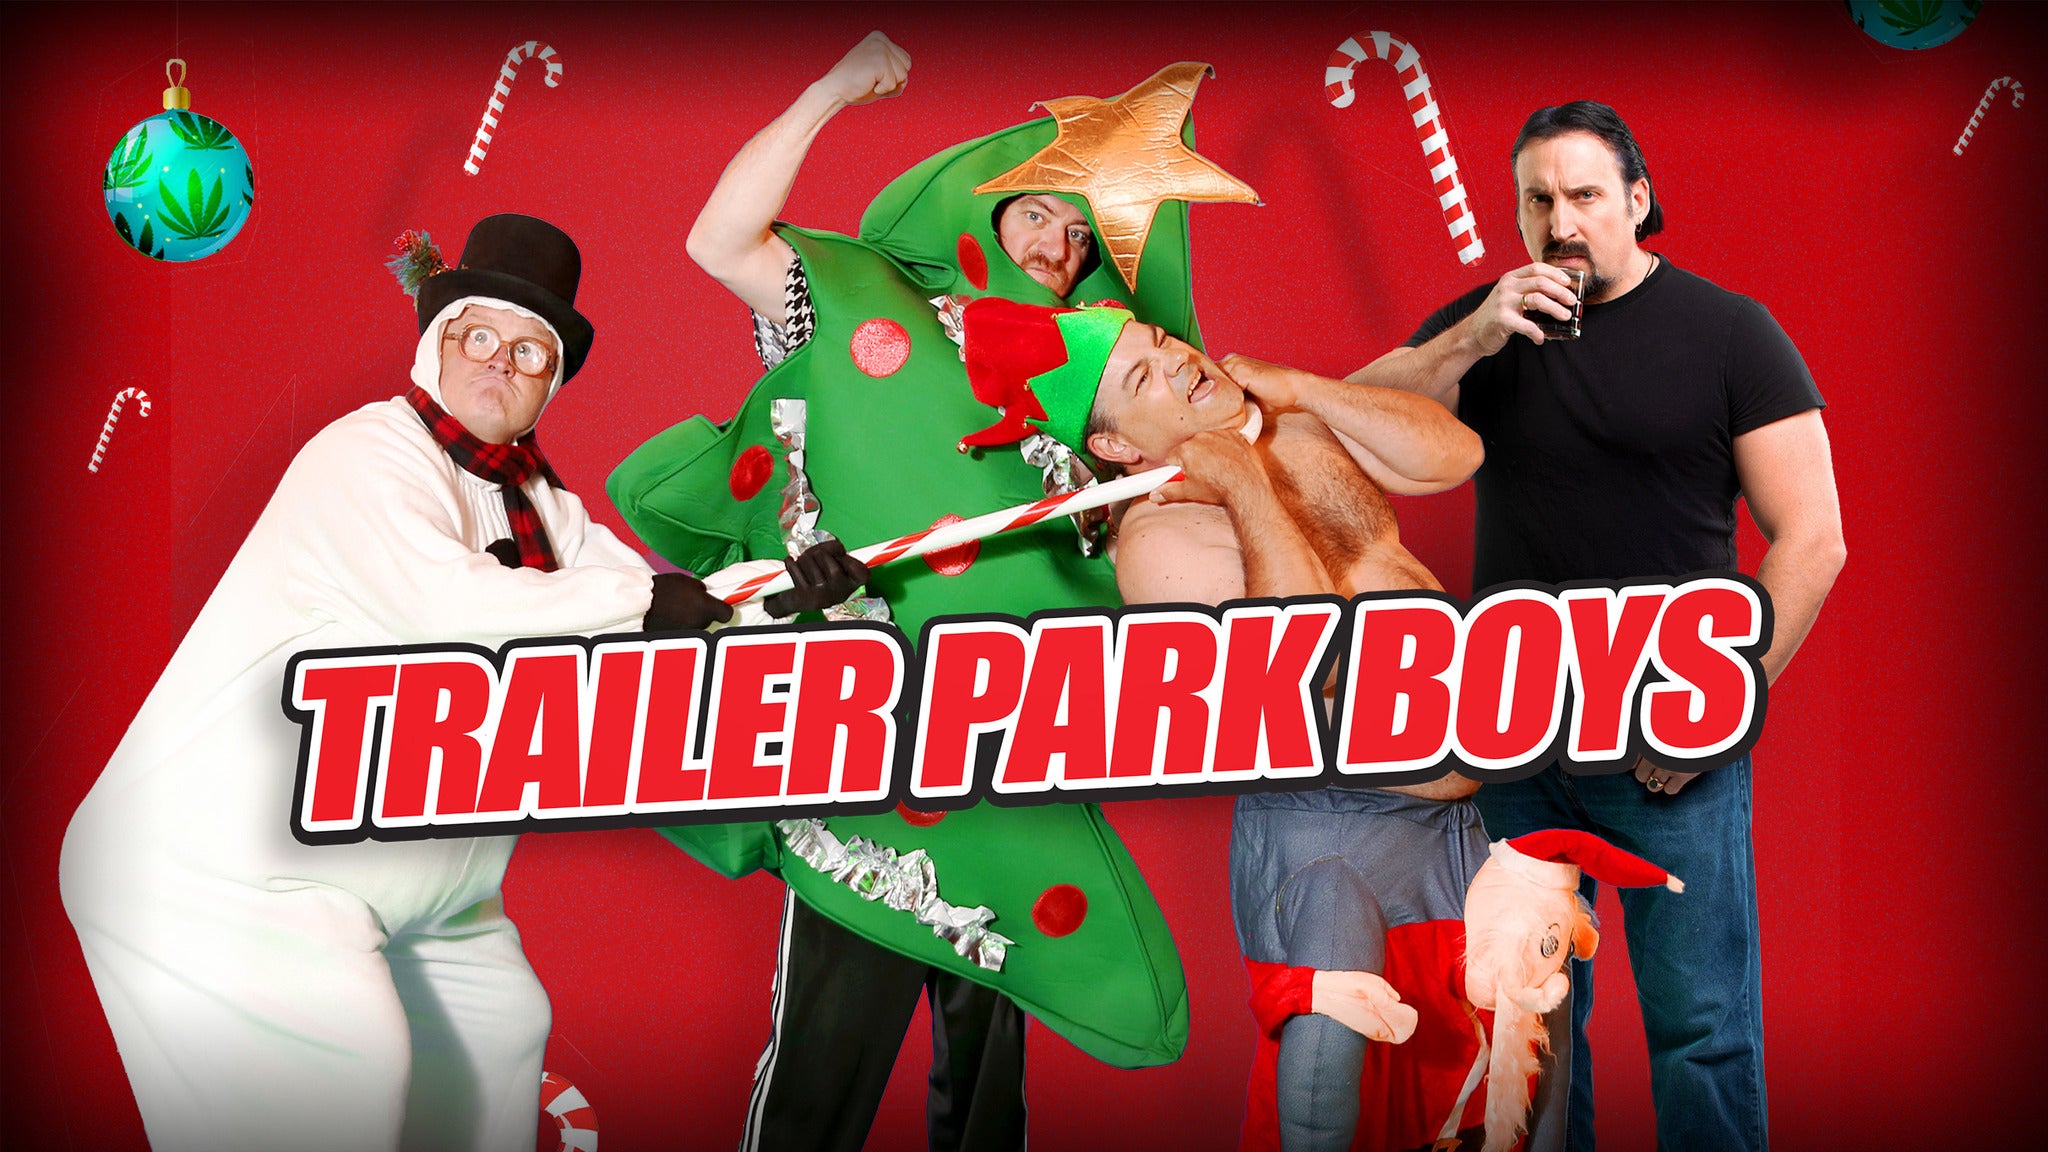 Trailer Park Boys in Kansas City promo photo for Exclusive presale offer code